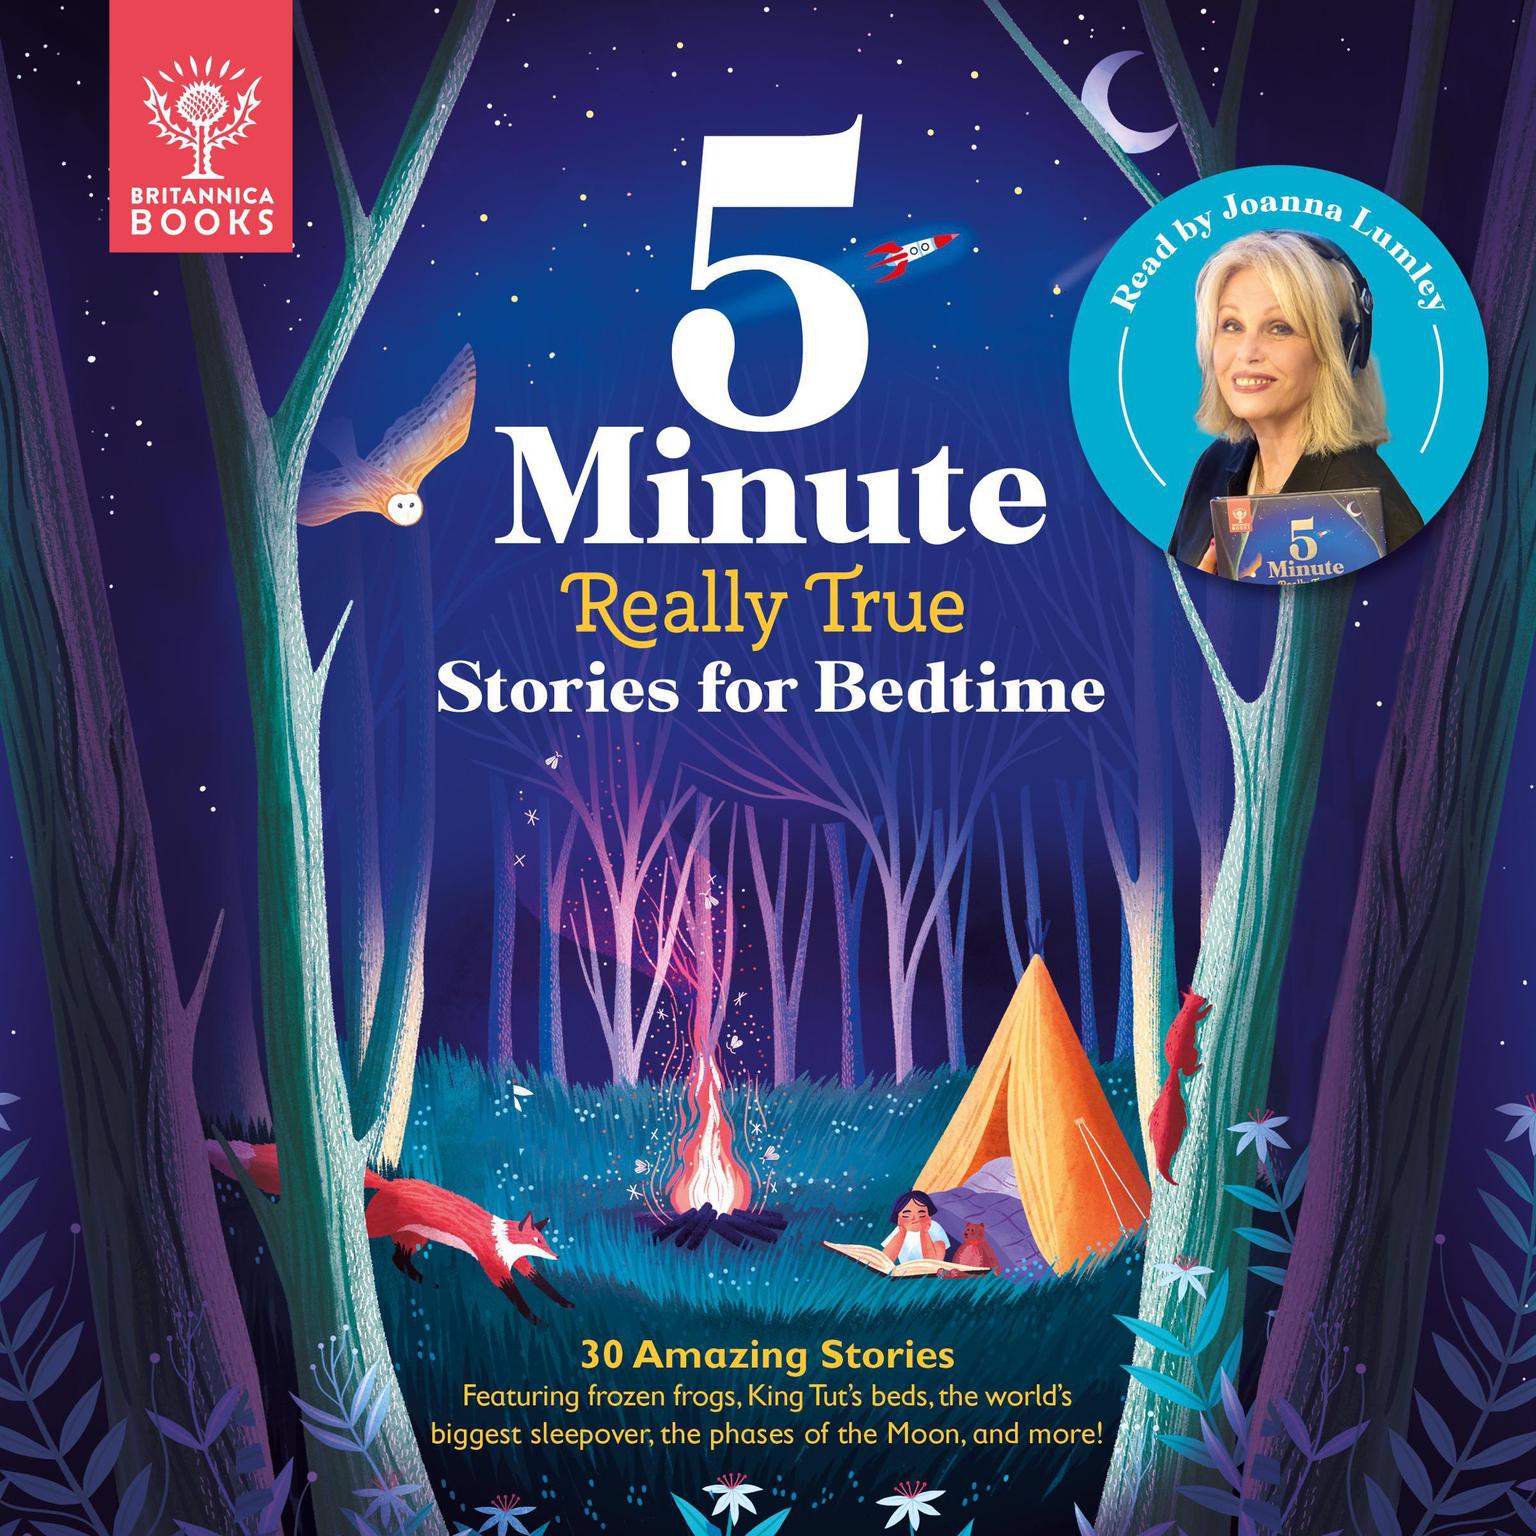 Britannica 5-Minute Really True Stories for Bedtime Audiobook, by Jackie McCann